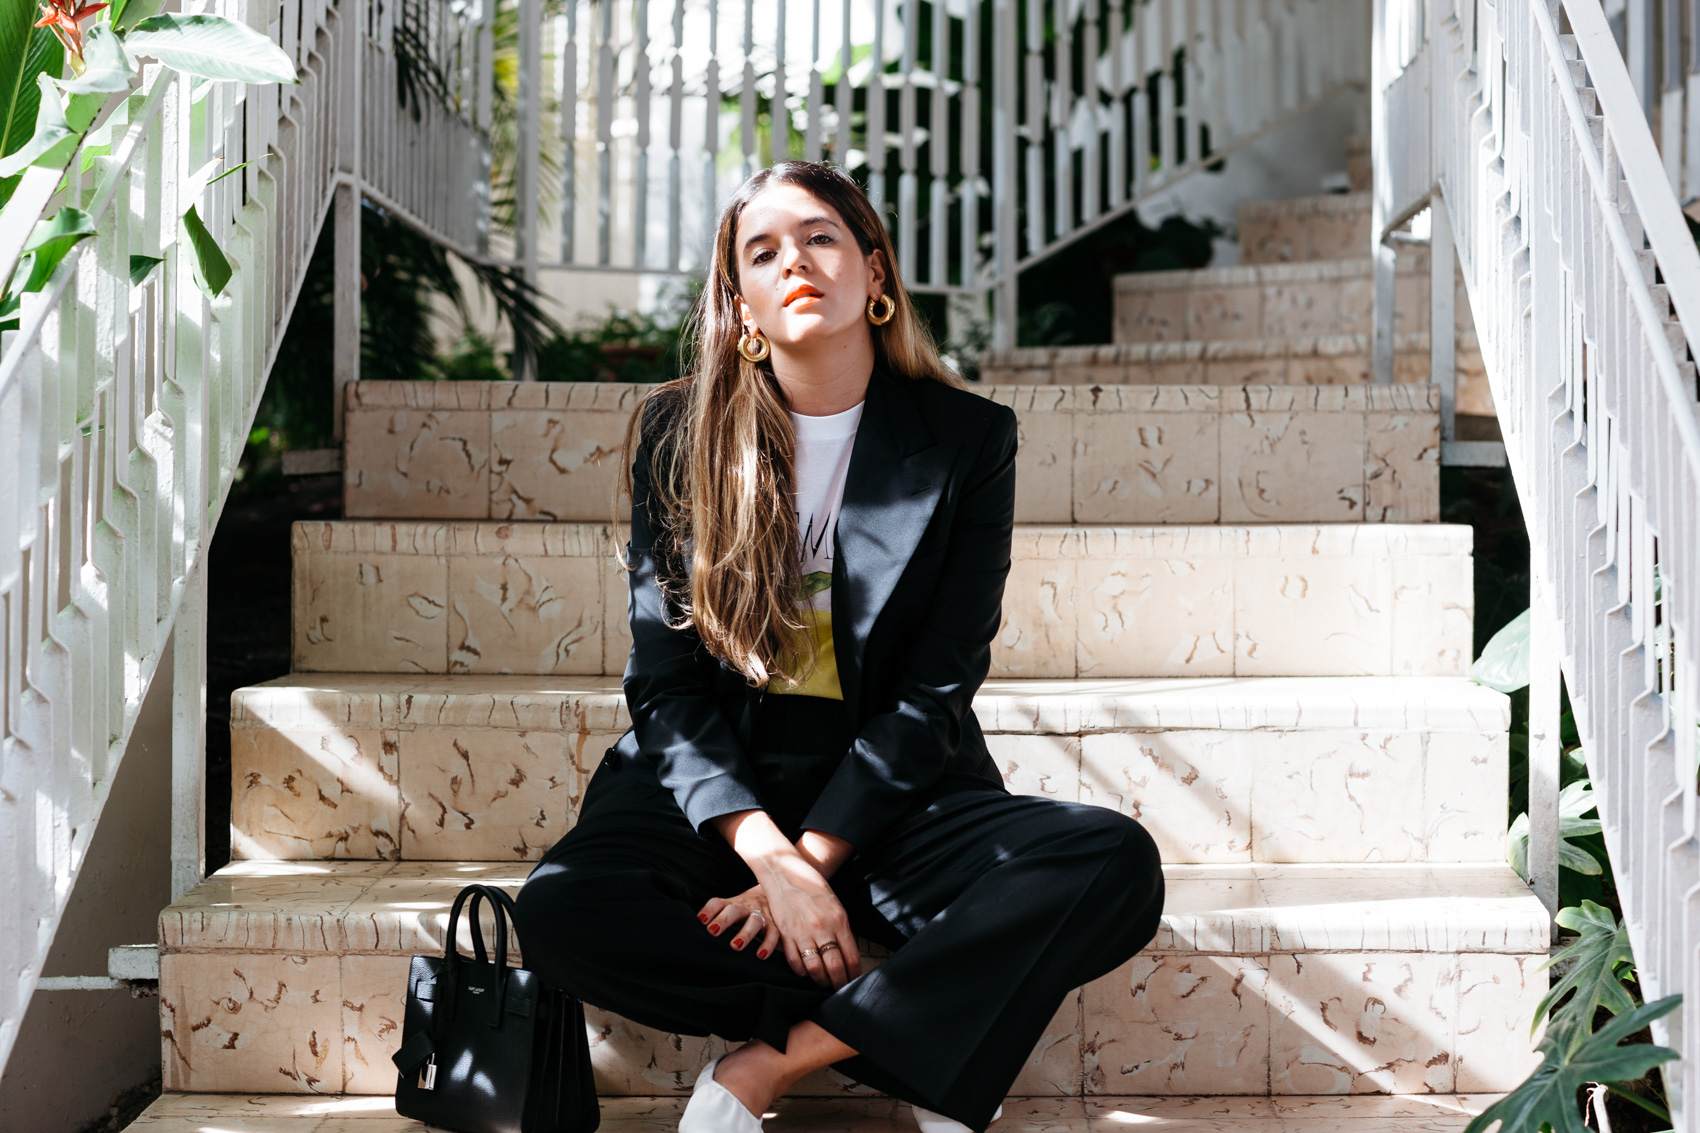 Maristella wears a chic black power suit with flats and a t-shirt